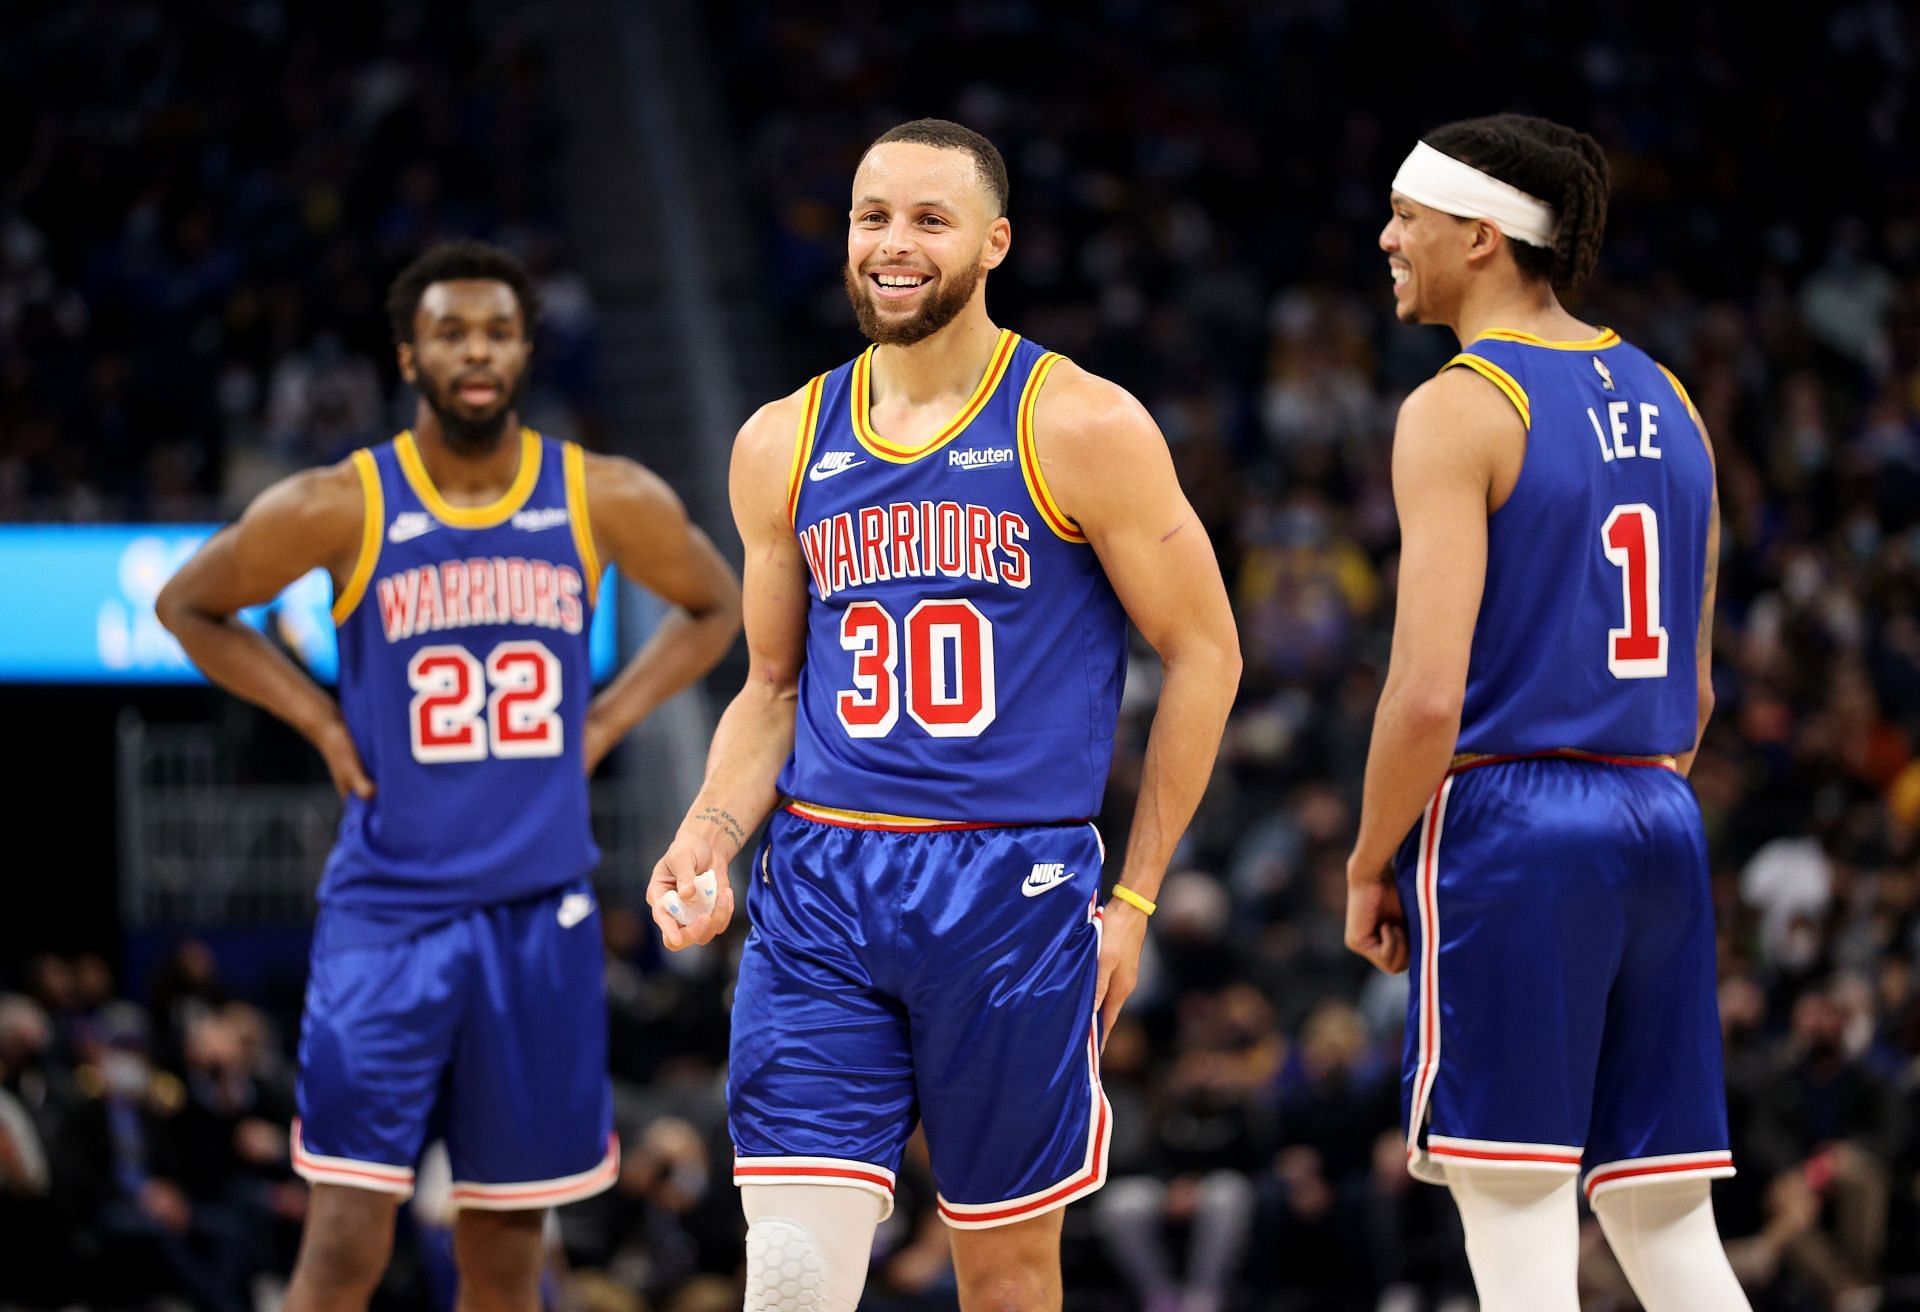 Steph Curry seemed to have broken his shooting slump against the Pistons.